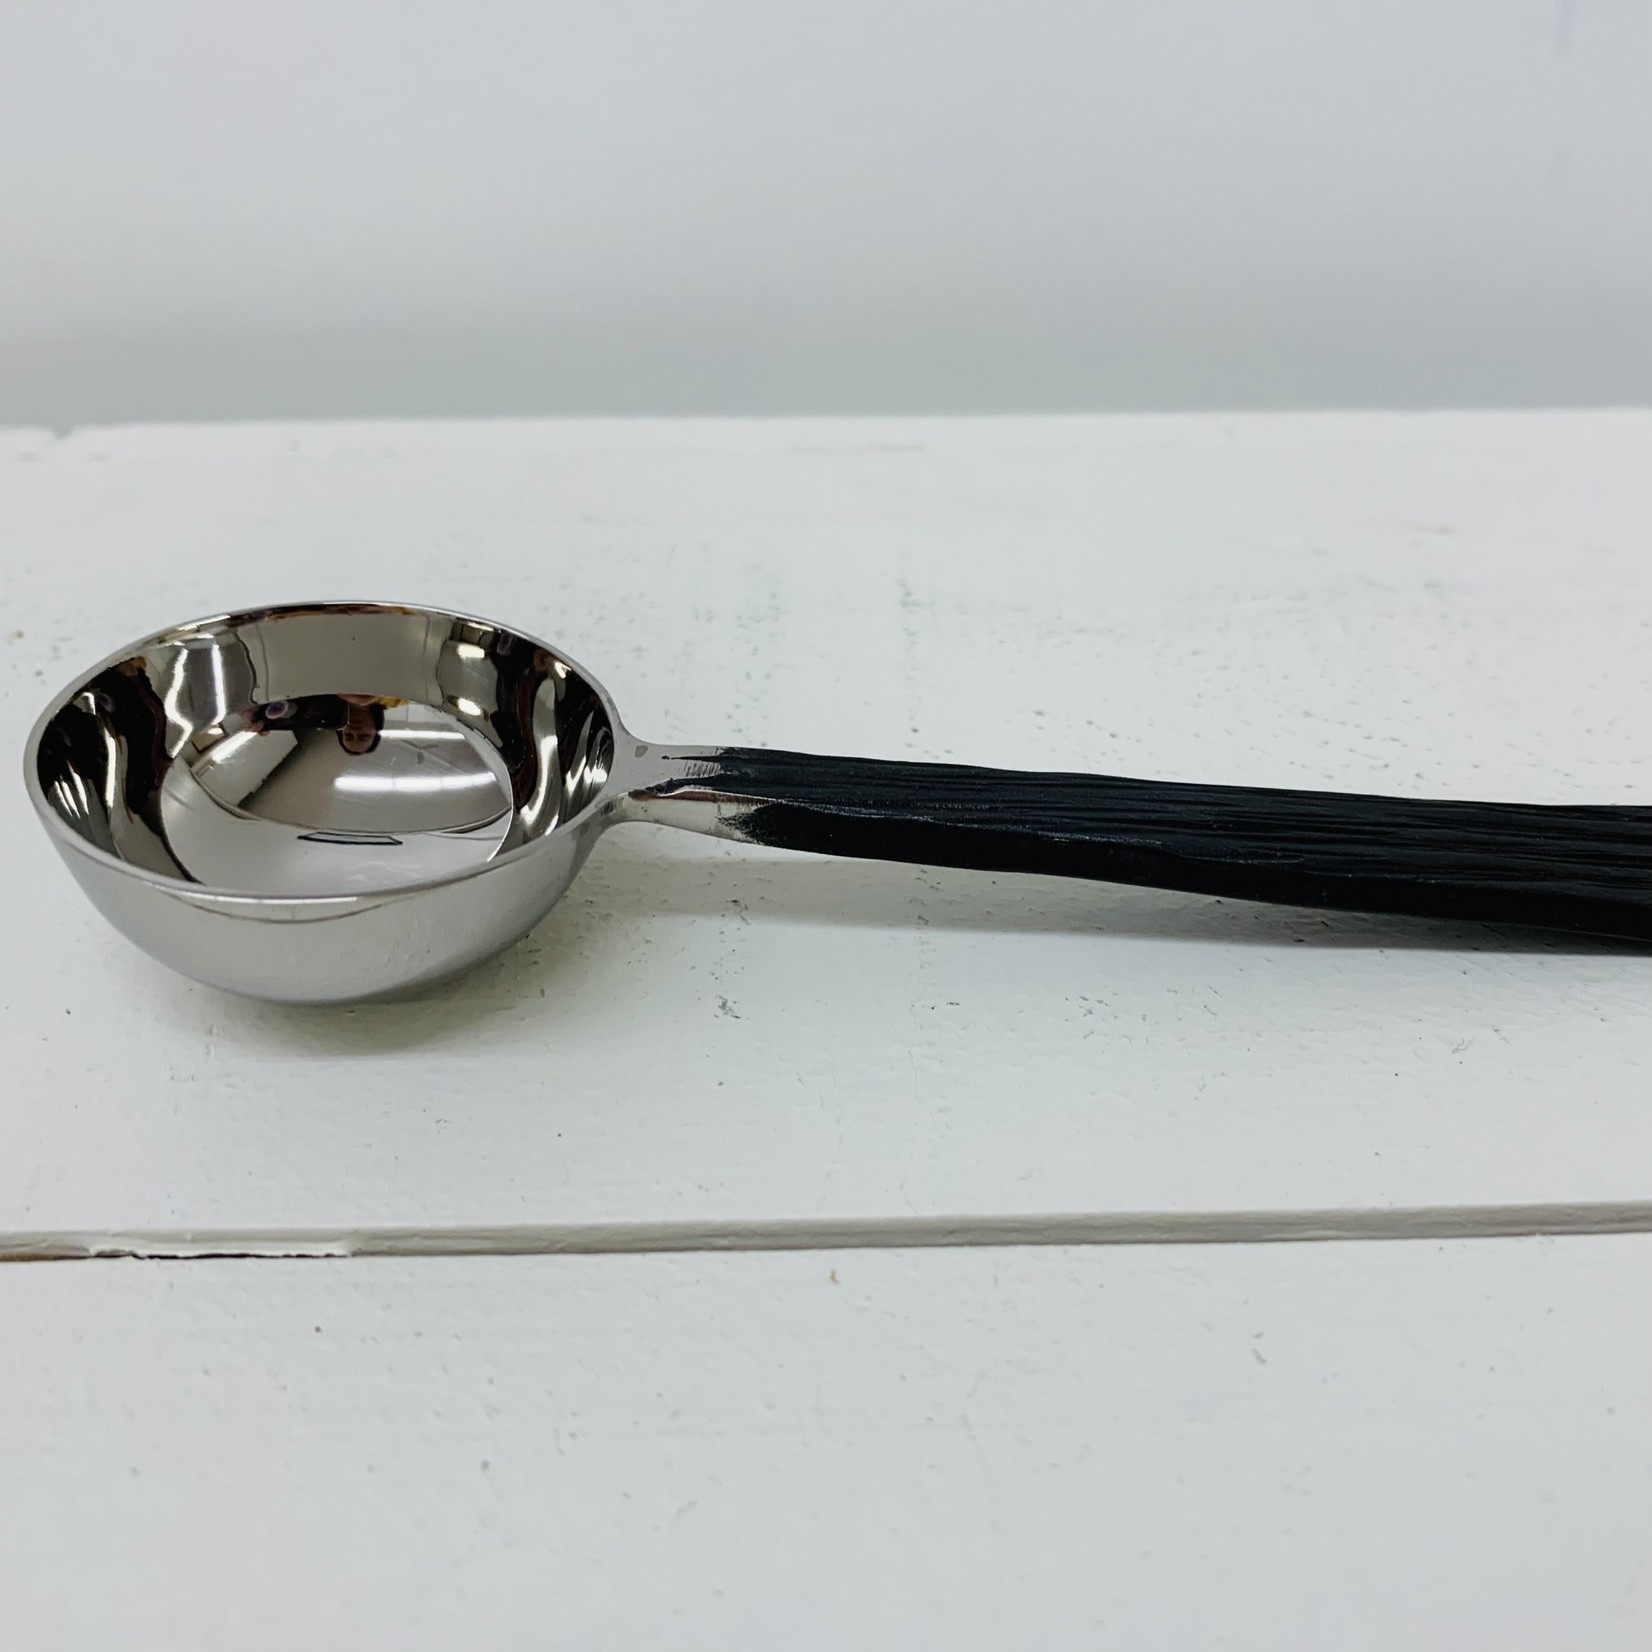 Ten Thousand Villages USA Hand-Forged Coffee Scoop, India